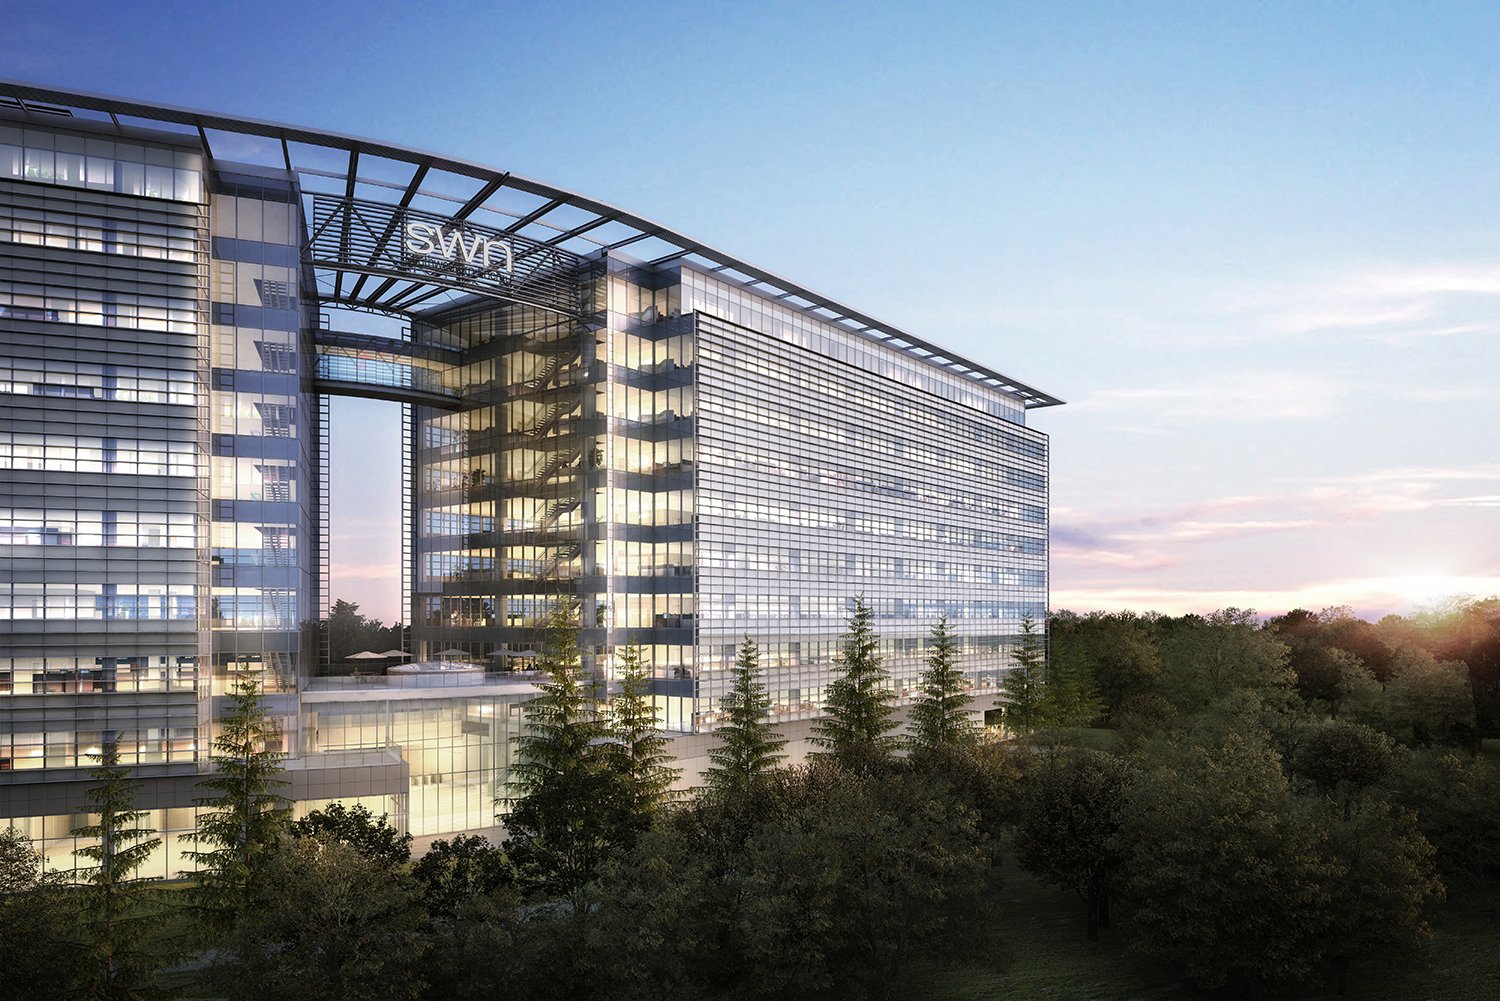 Energy company to construct its headquarters in Springwoods Village - Houston Chronicle